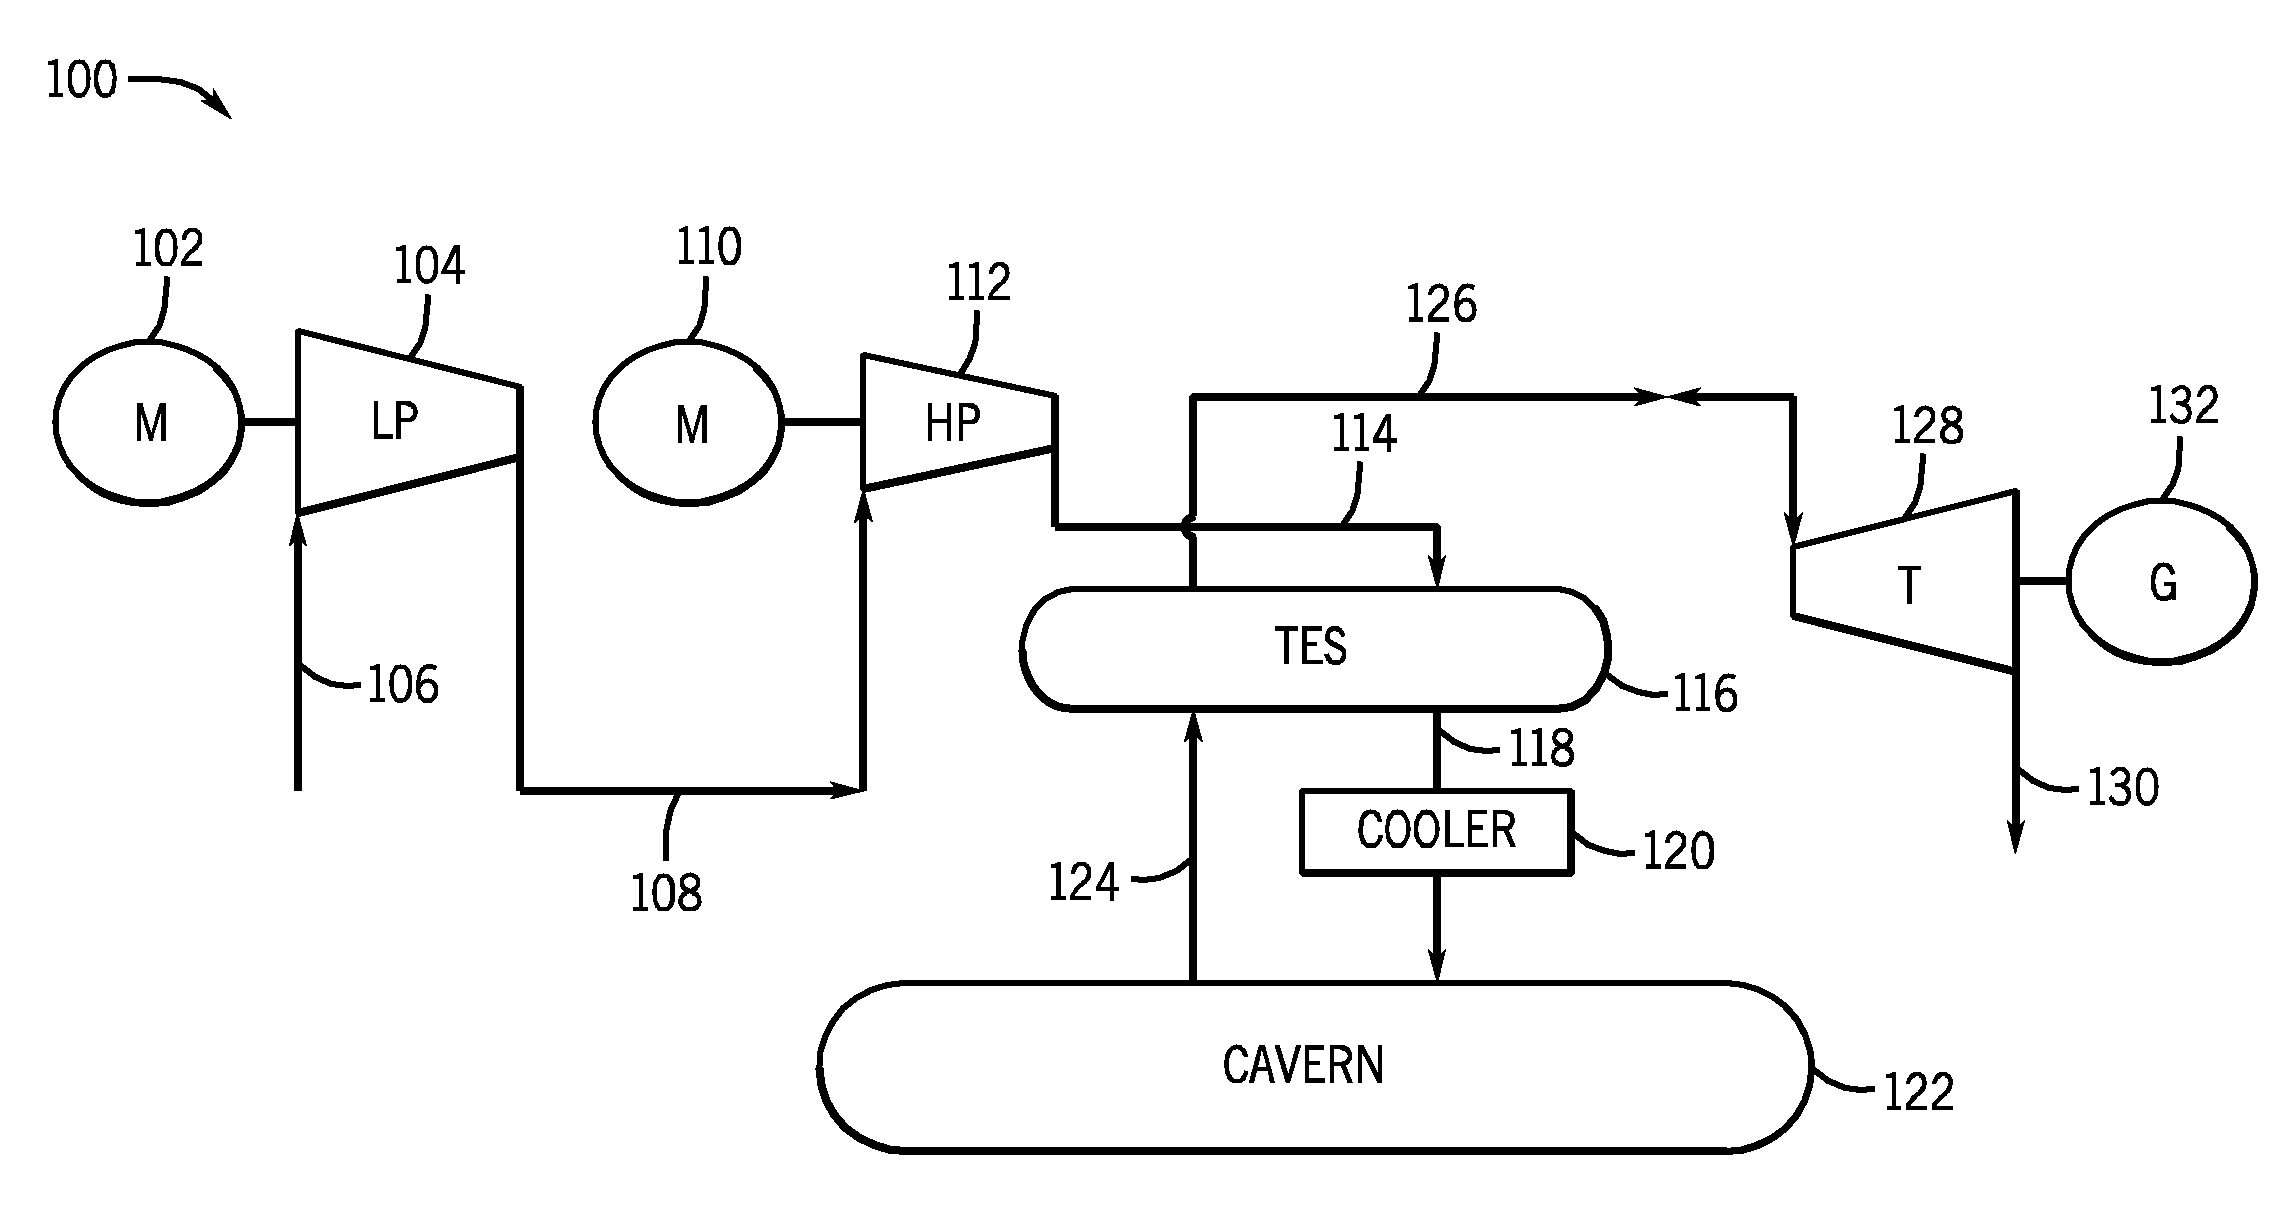 Regenerative thermal energy storage apparatus for an adiabatic compressed air energy storage system